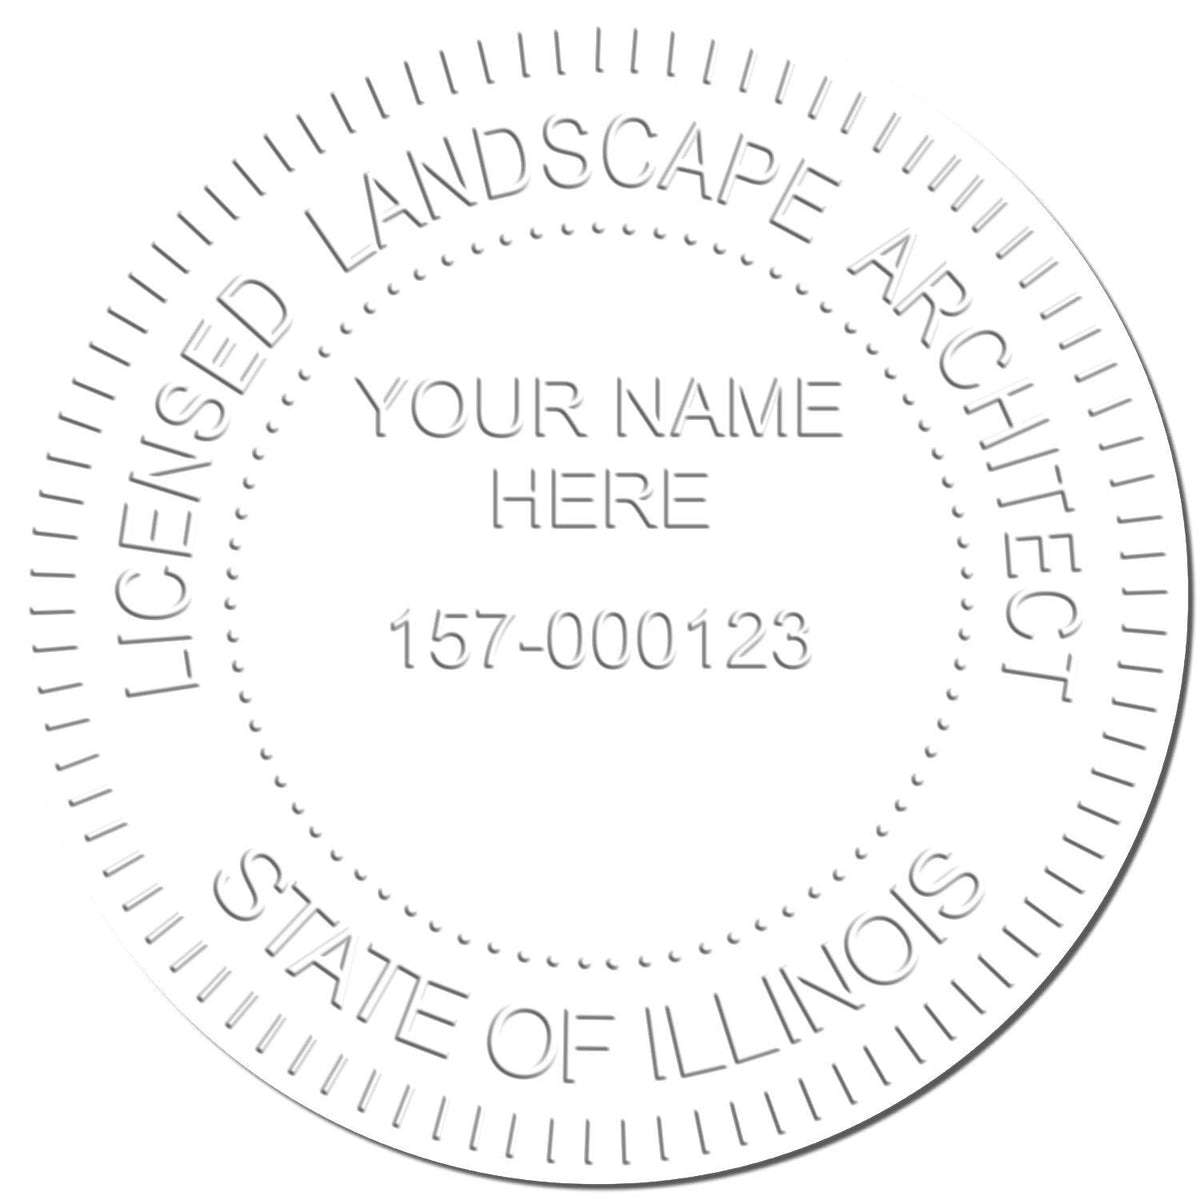 Landscape Architect Pink Gift Embosser - Engineer Seal Stamps - Embosser Type_Desk, Embosser Type_Gift, Type of Use_Professional